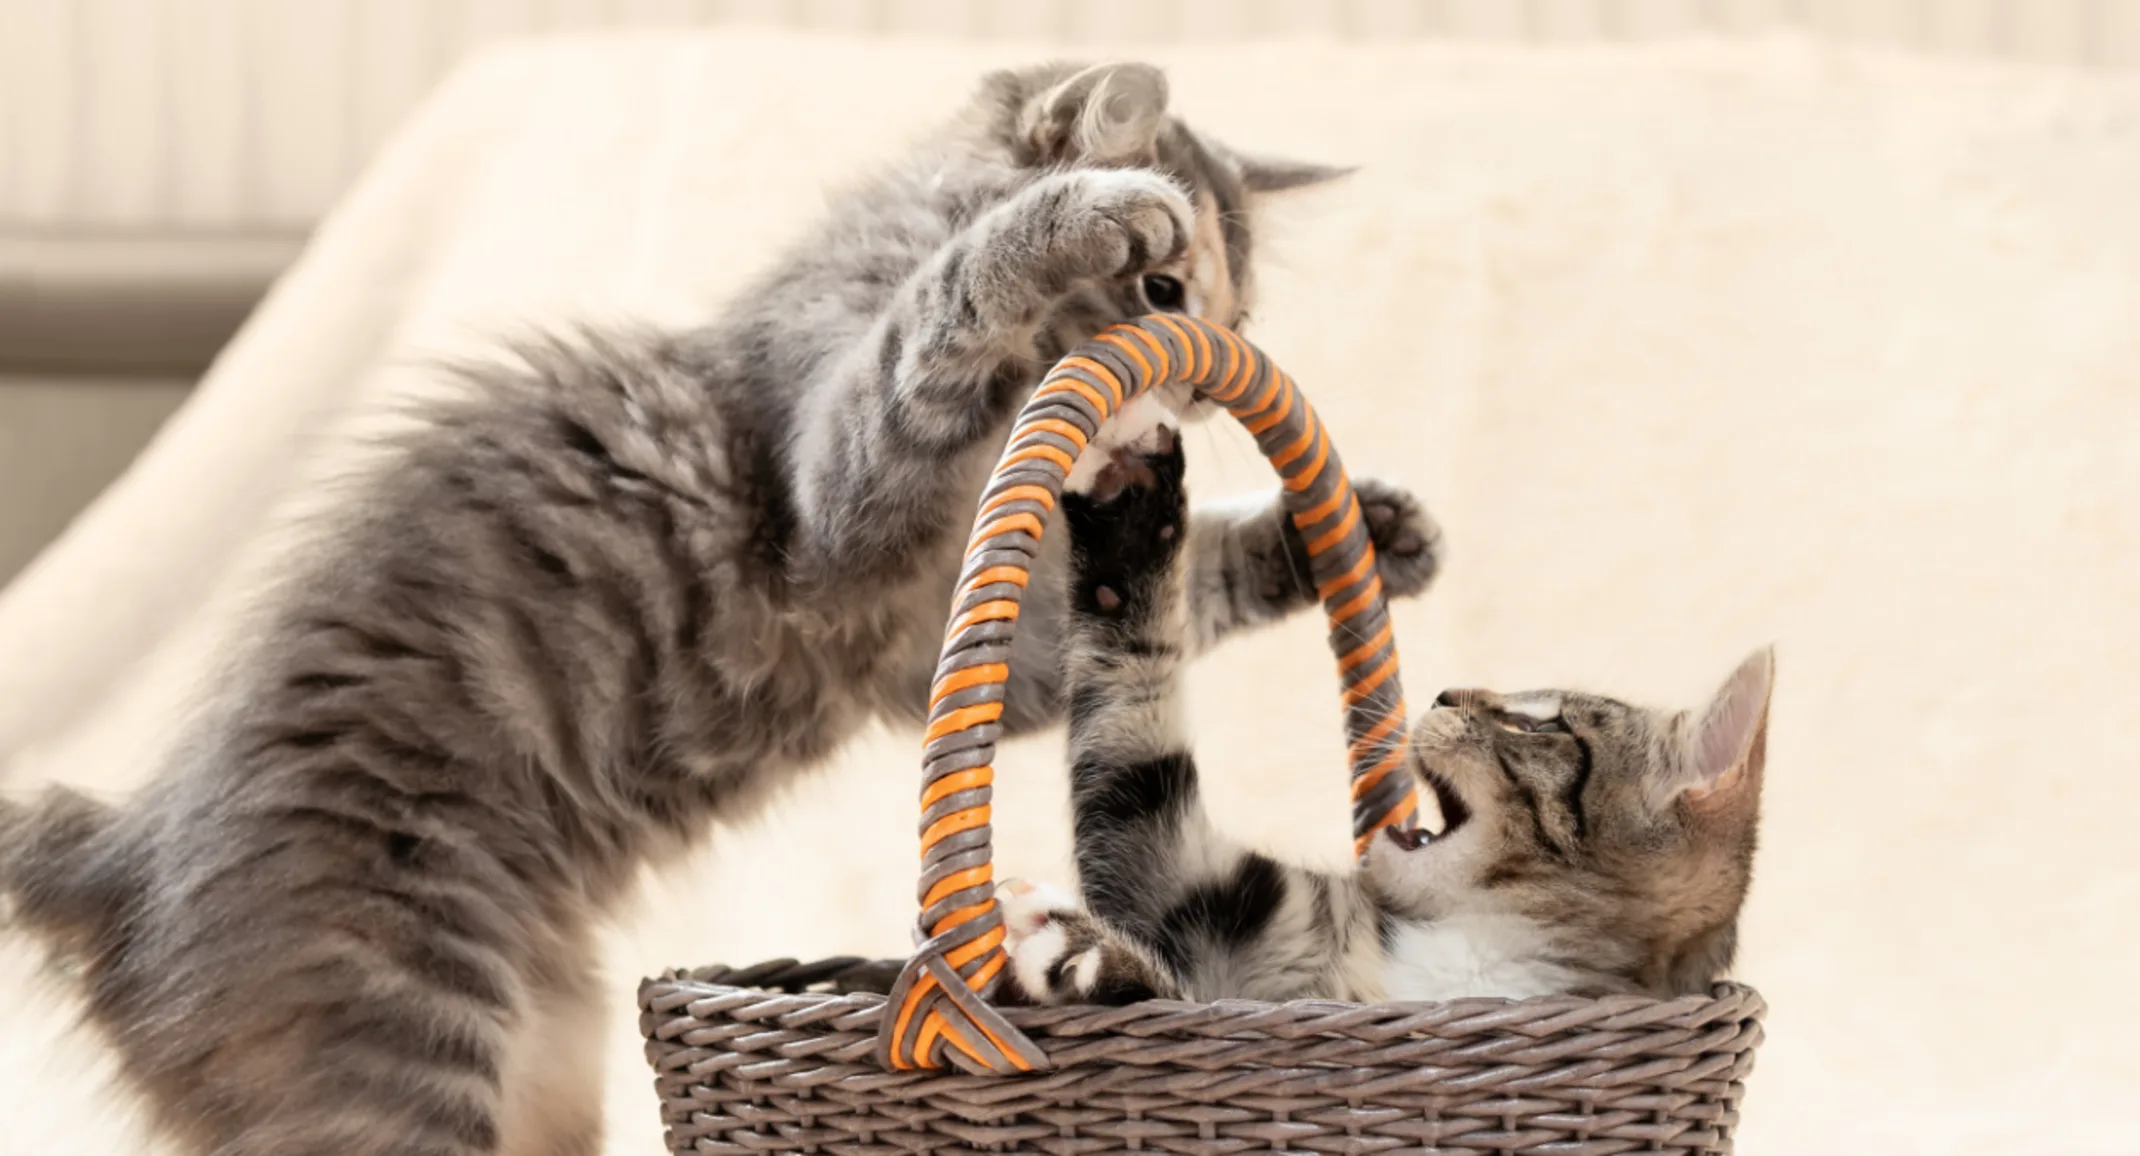 Two grey tabby kittens playing in a basket